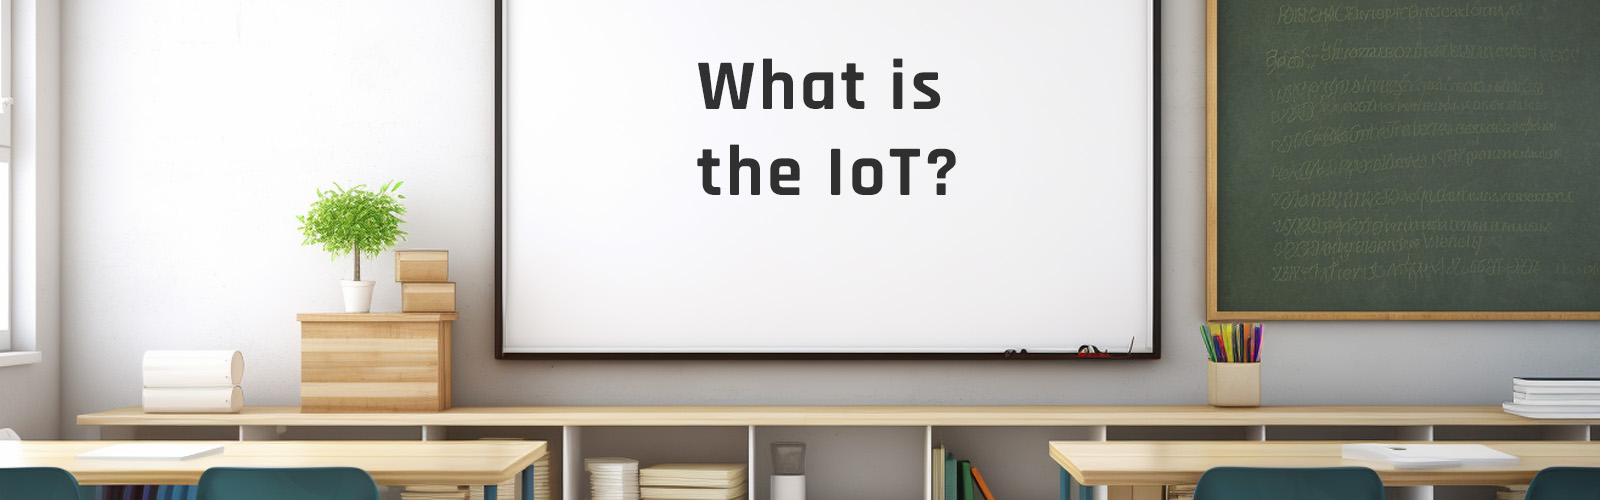 Smart Whiteboard displaying the question "What is the IoT?" in a classroom powered by IoT in education